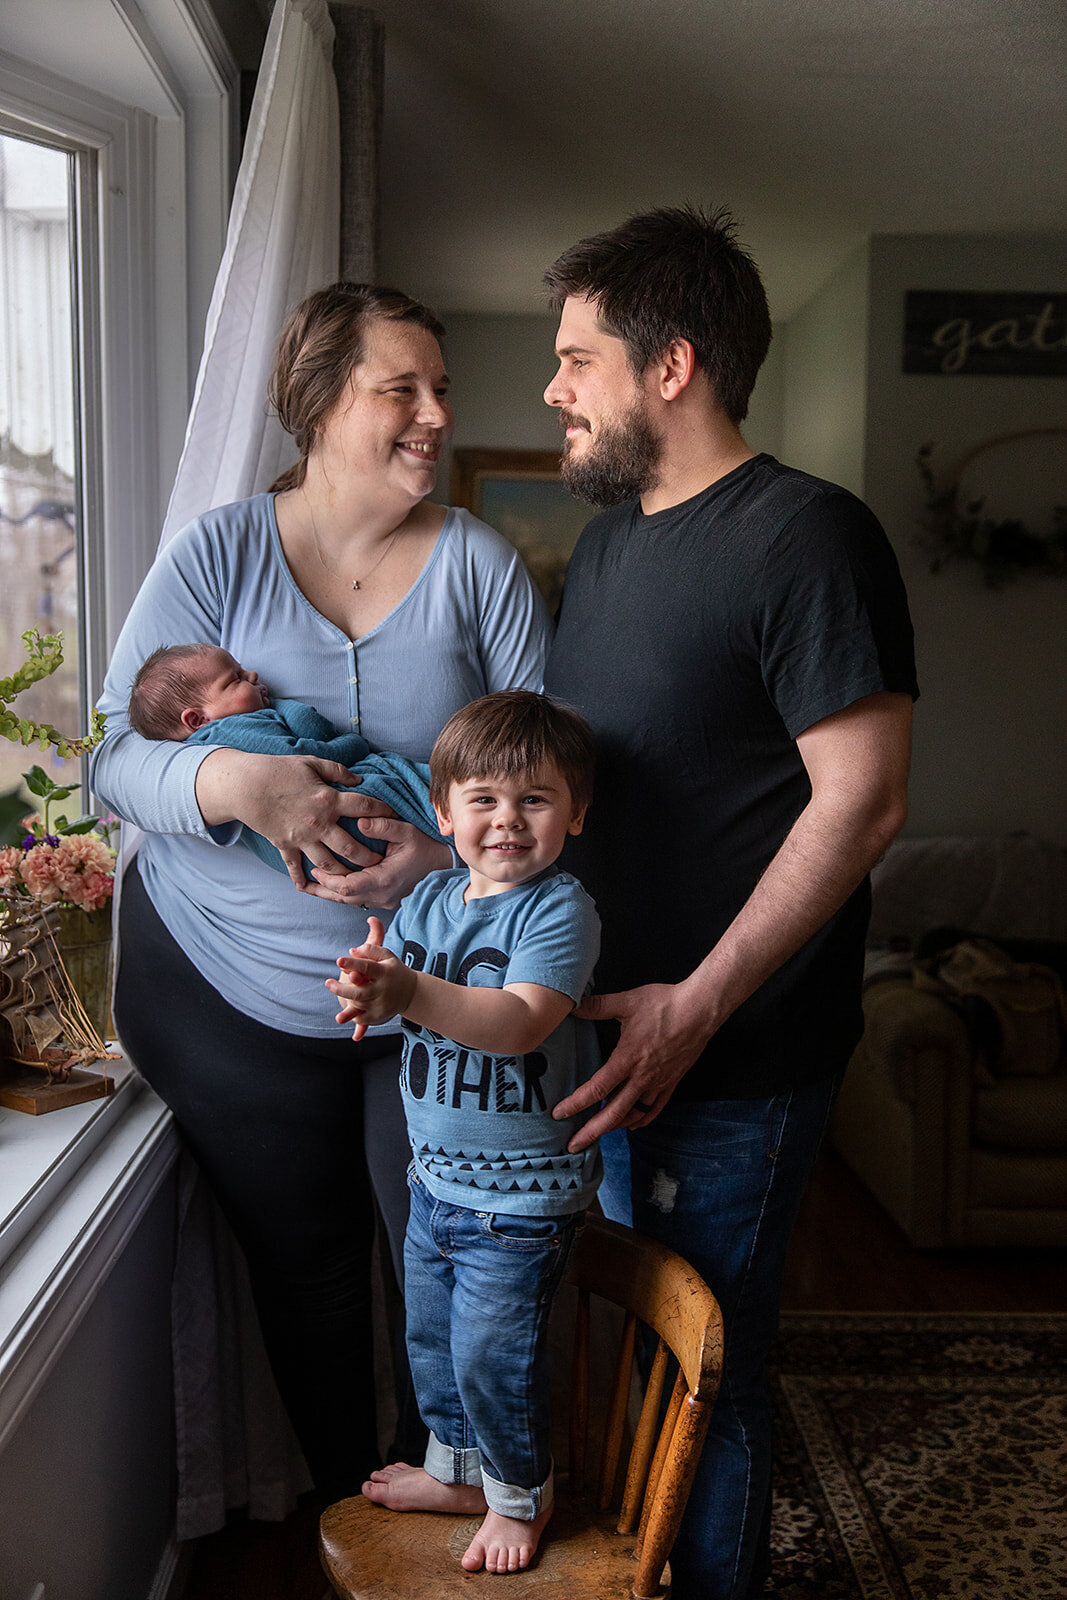 Family Poses With New Baby Beside Window in Home